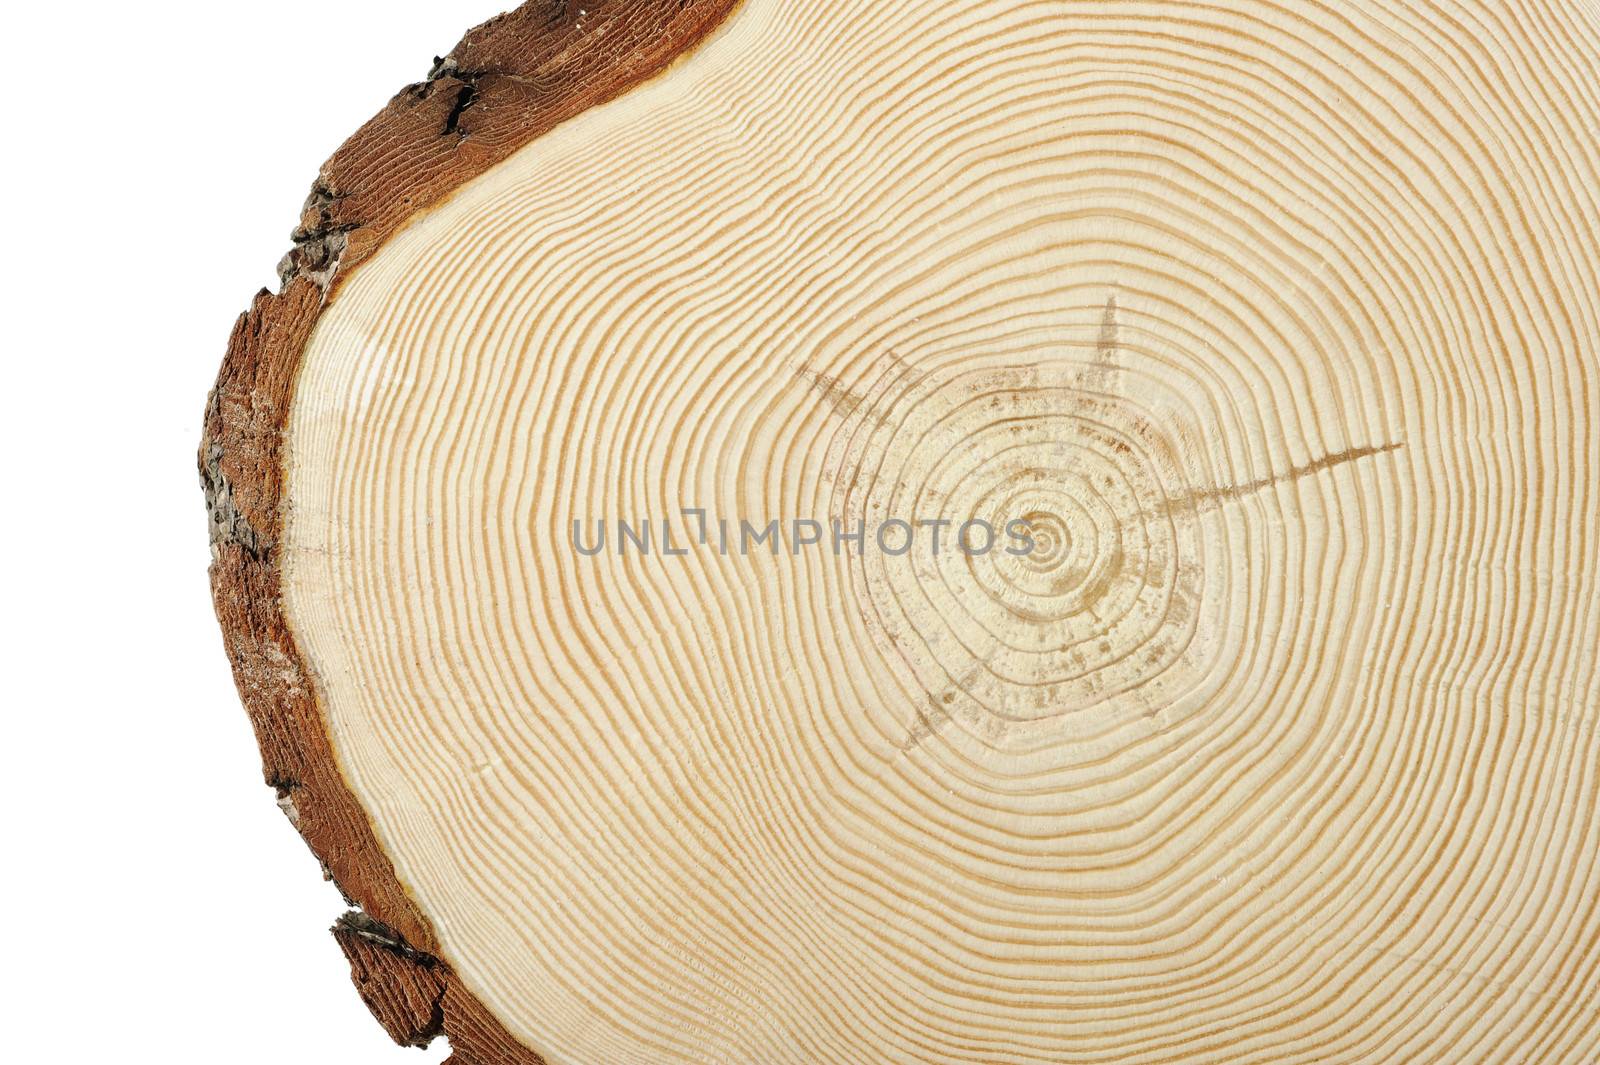 Circular wood cross section with curved lines showing growth.